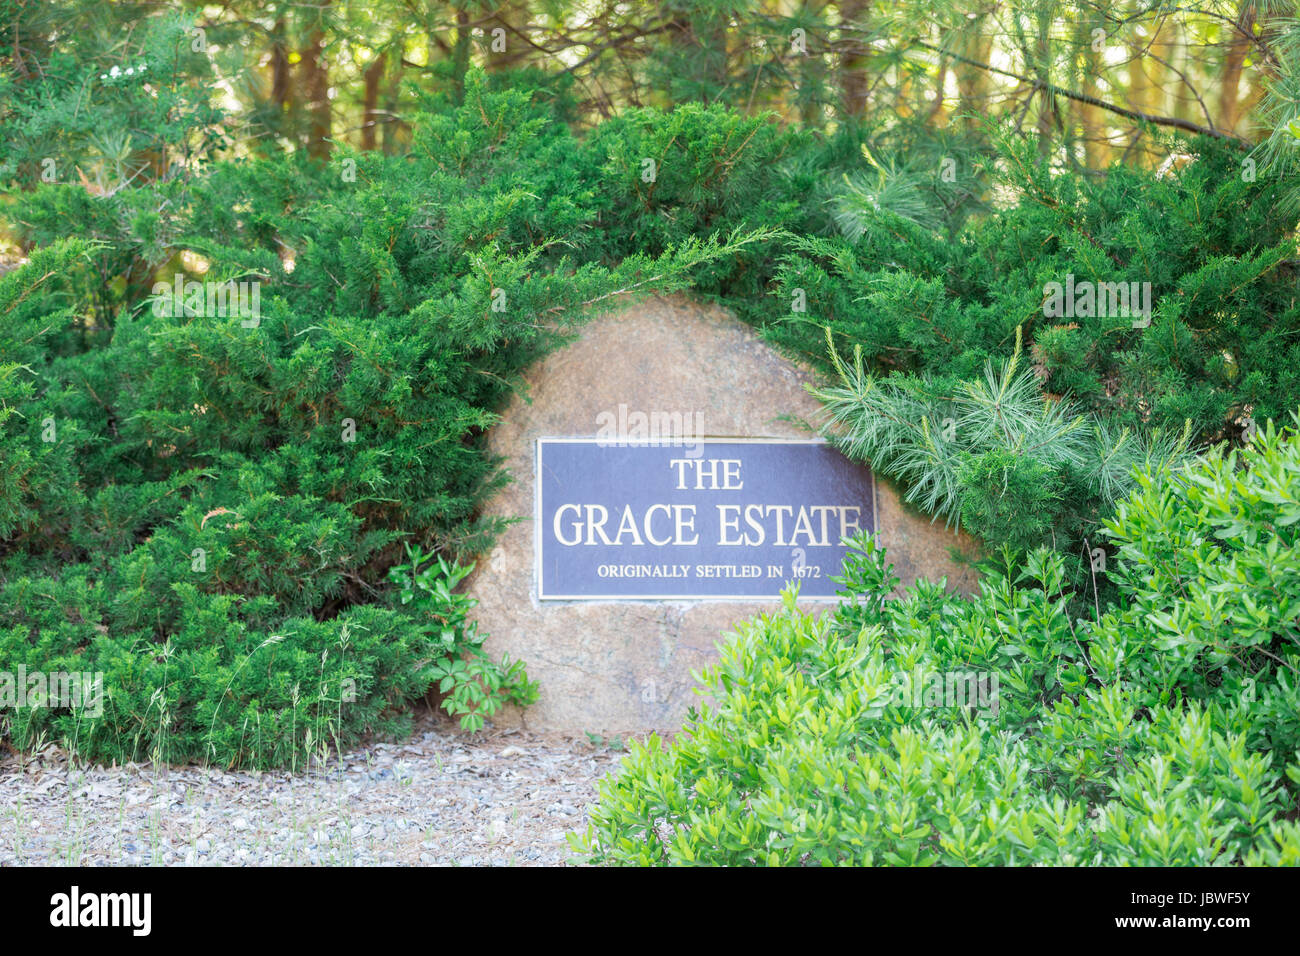 The Grace Estate, a private community, plaque on a stone in East Hampton, NY Stock Photo